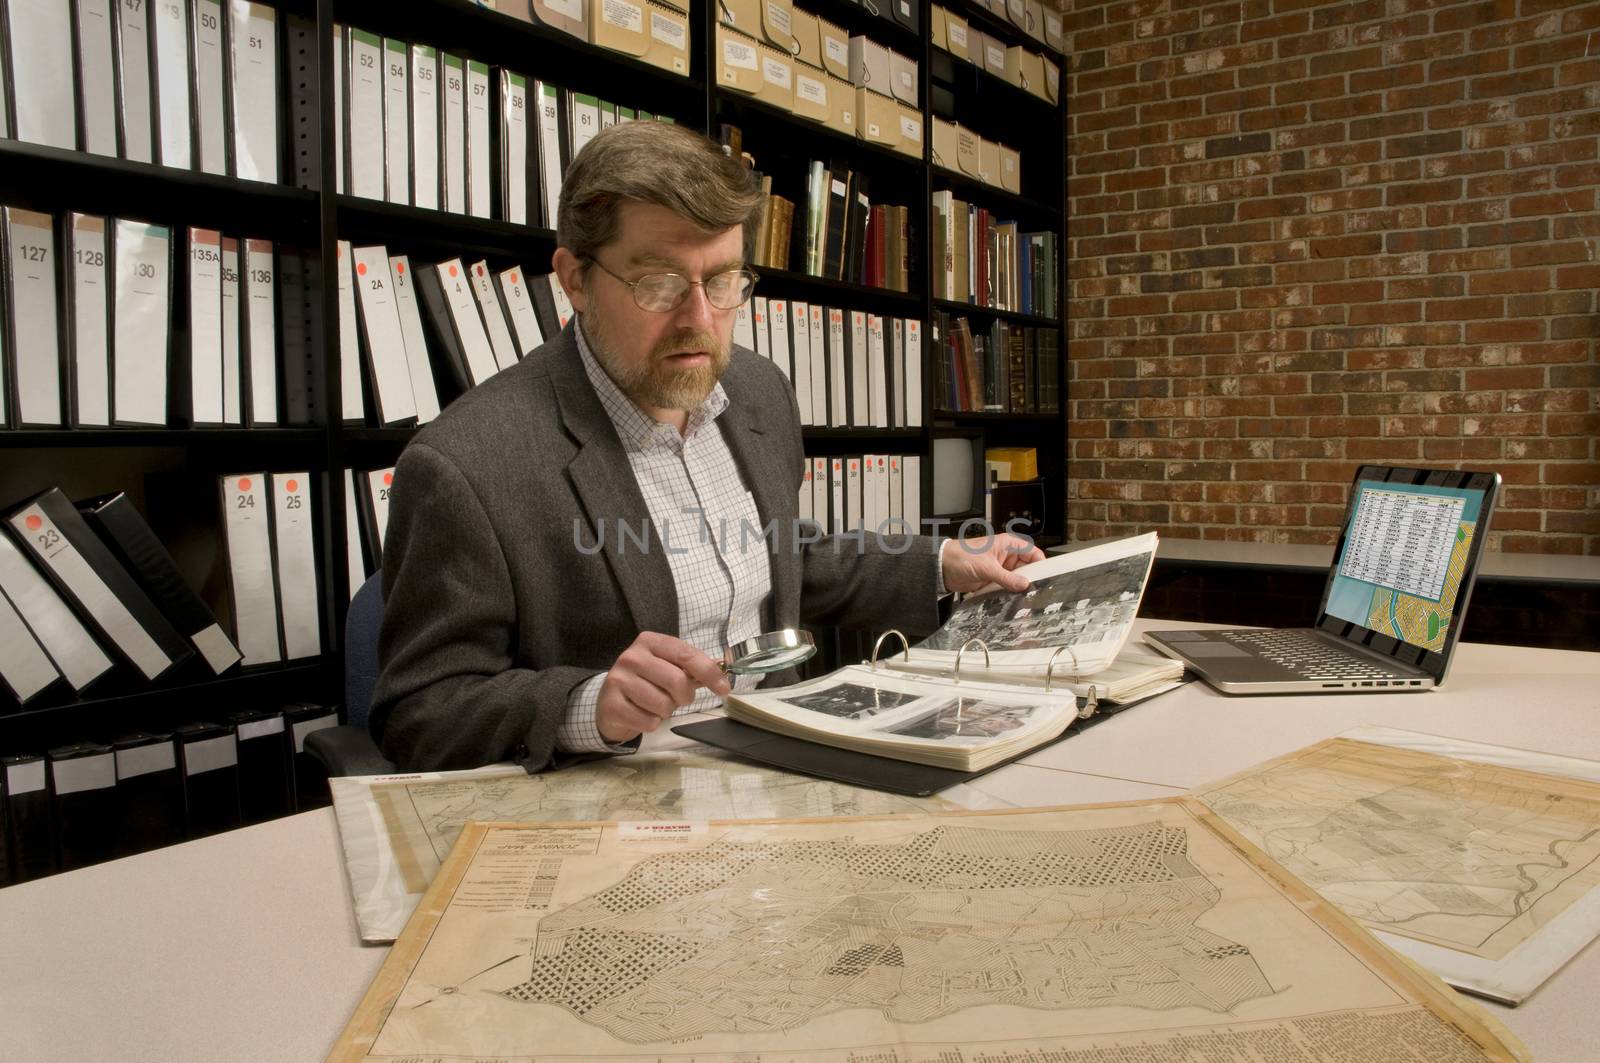 Researcher in archive, searching through maps and photographs. Model released. (All maps and photos shown in archive are public domain. Image on computer was created for this photograph.)